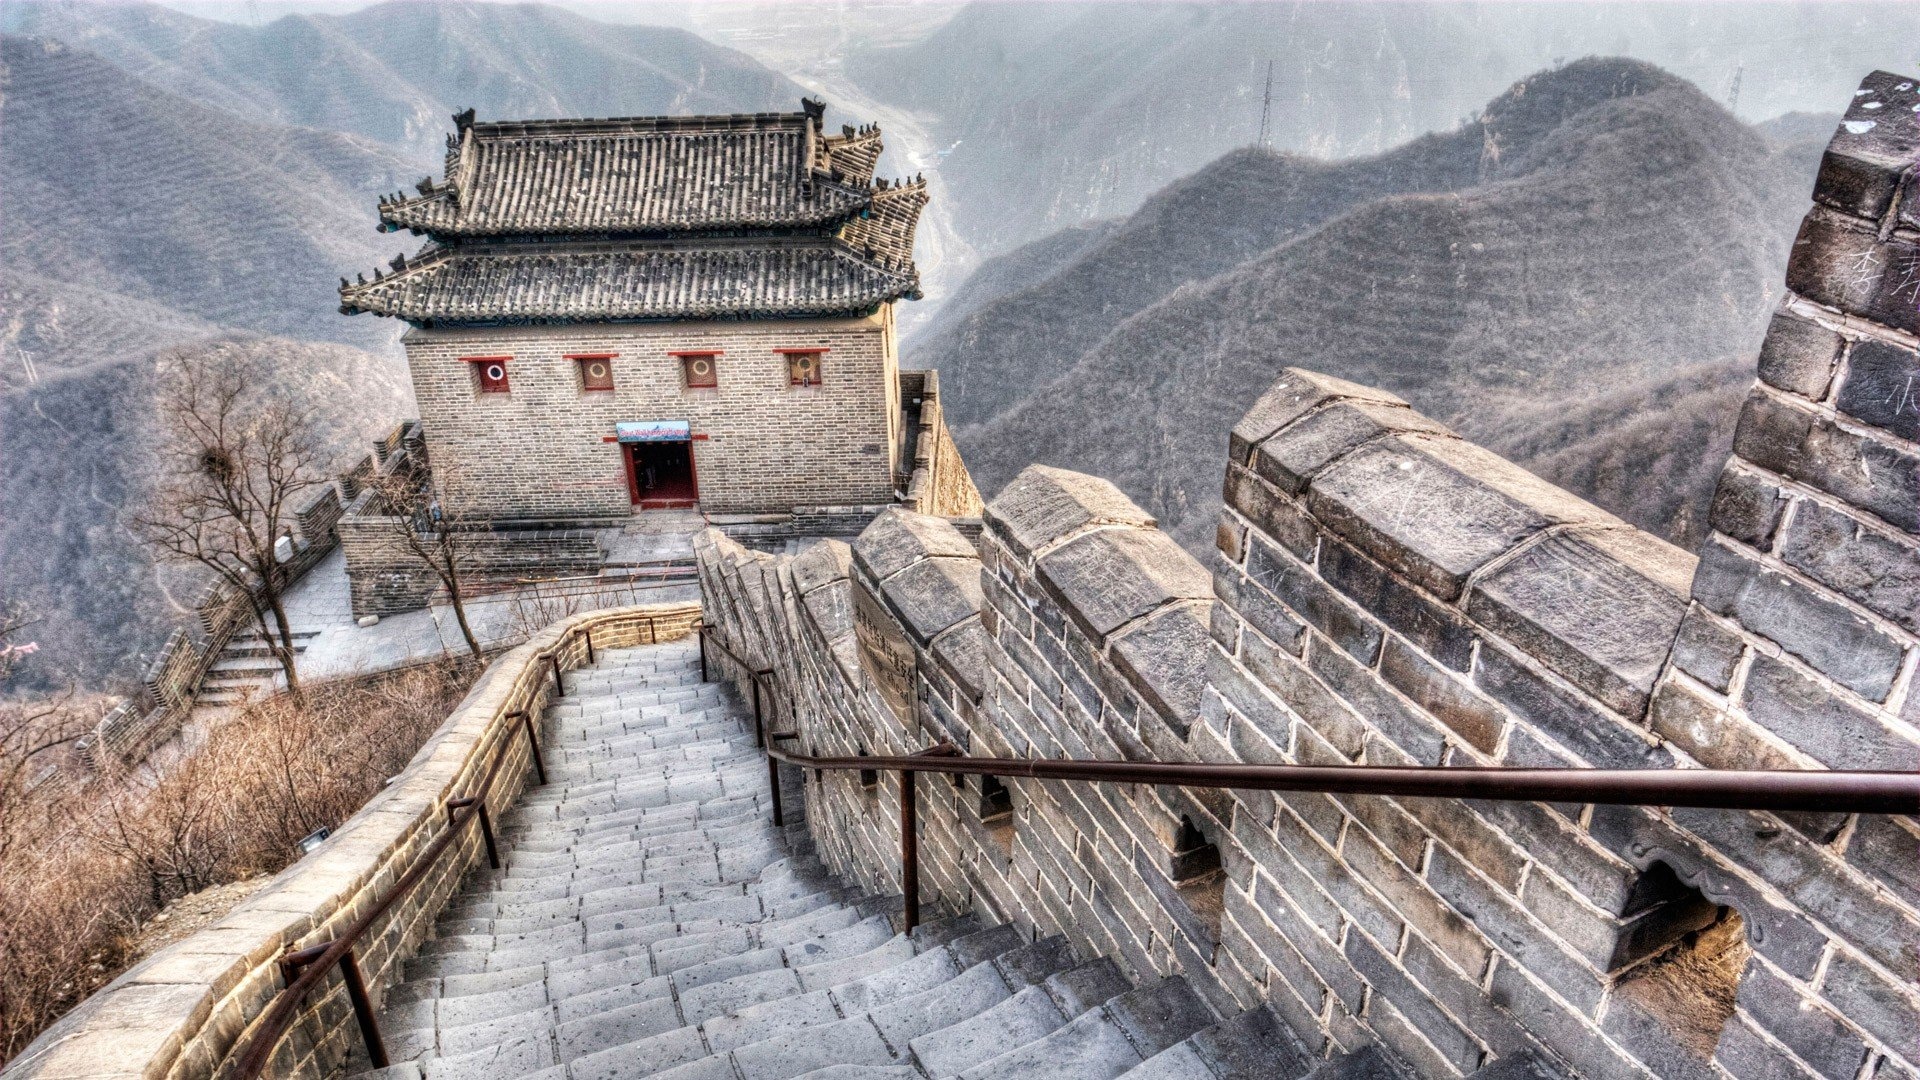 Great Wall of China: Was built to protect the Empire from invasion as well as to impose border control. 1920x1080 Full HD Wallpaper.